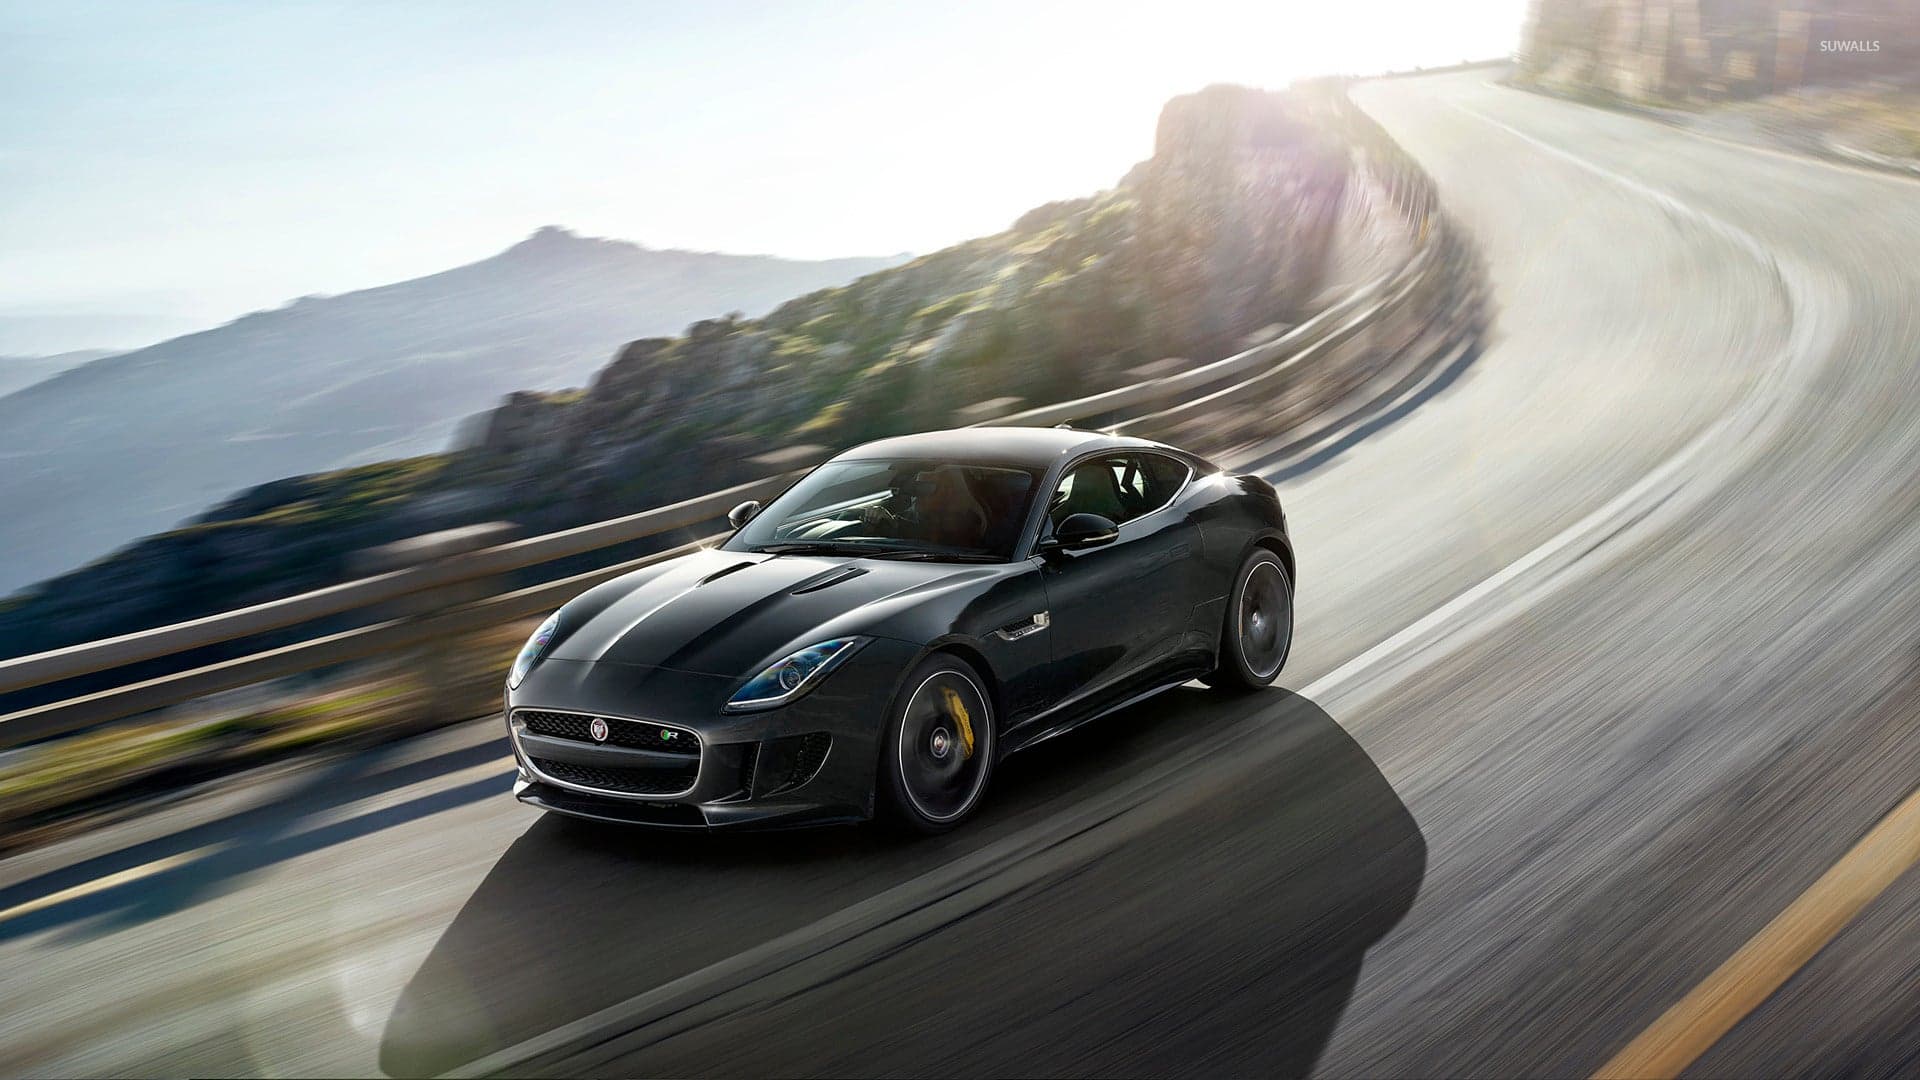 Next-Gen Jaguar F-Type in Development Expected to Be a Hybrid